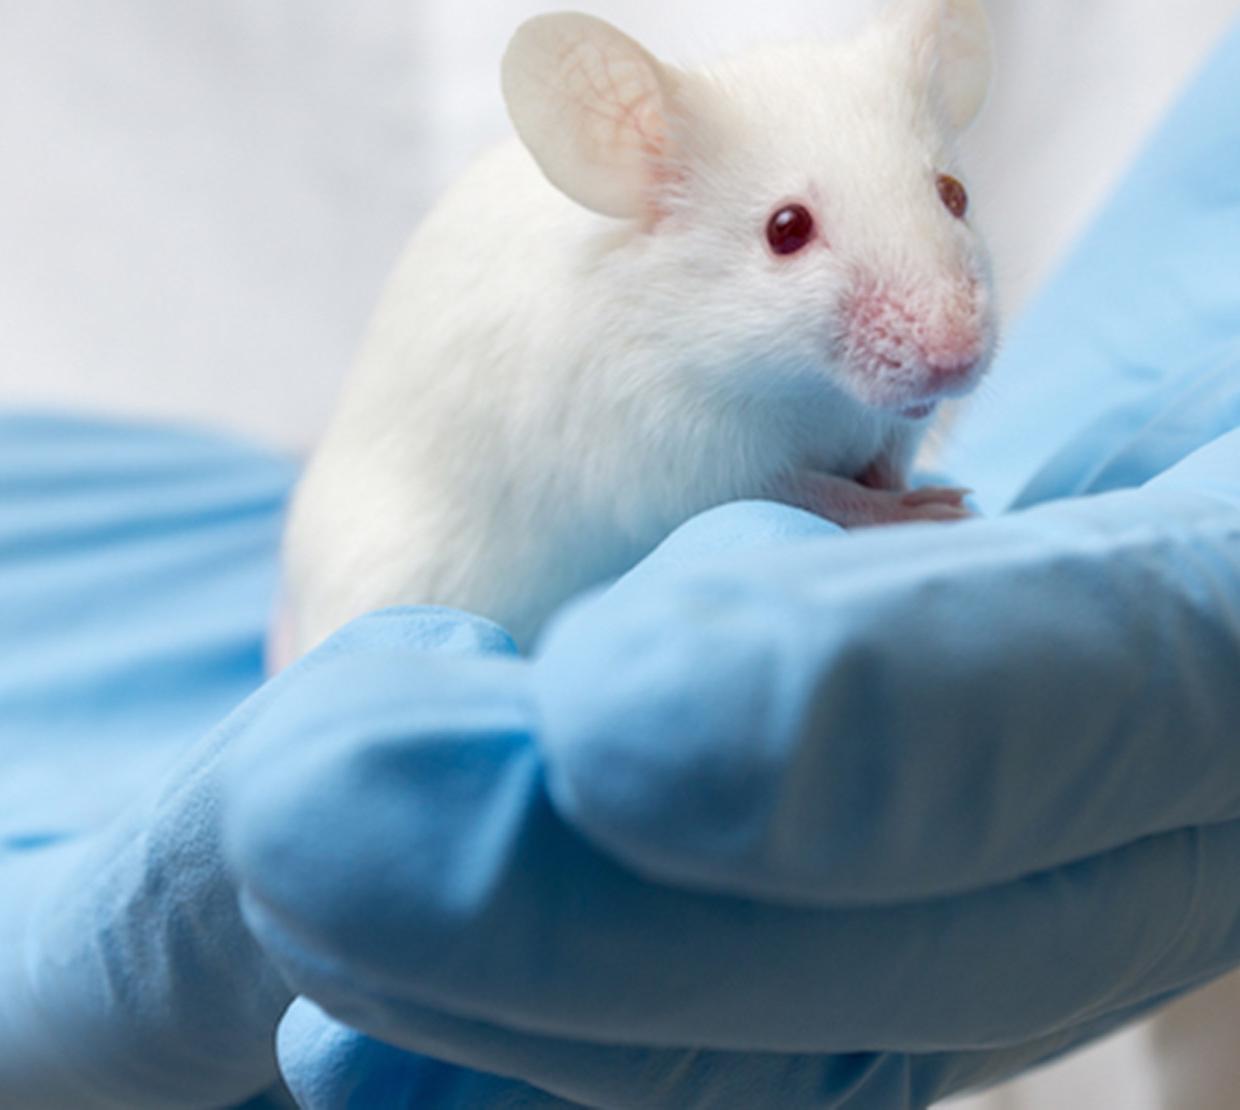 lab mouse in the hands of blue sanitation gloves